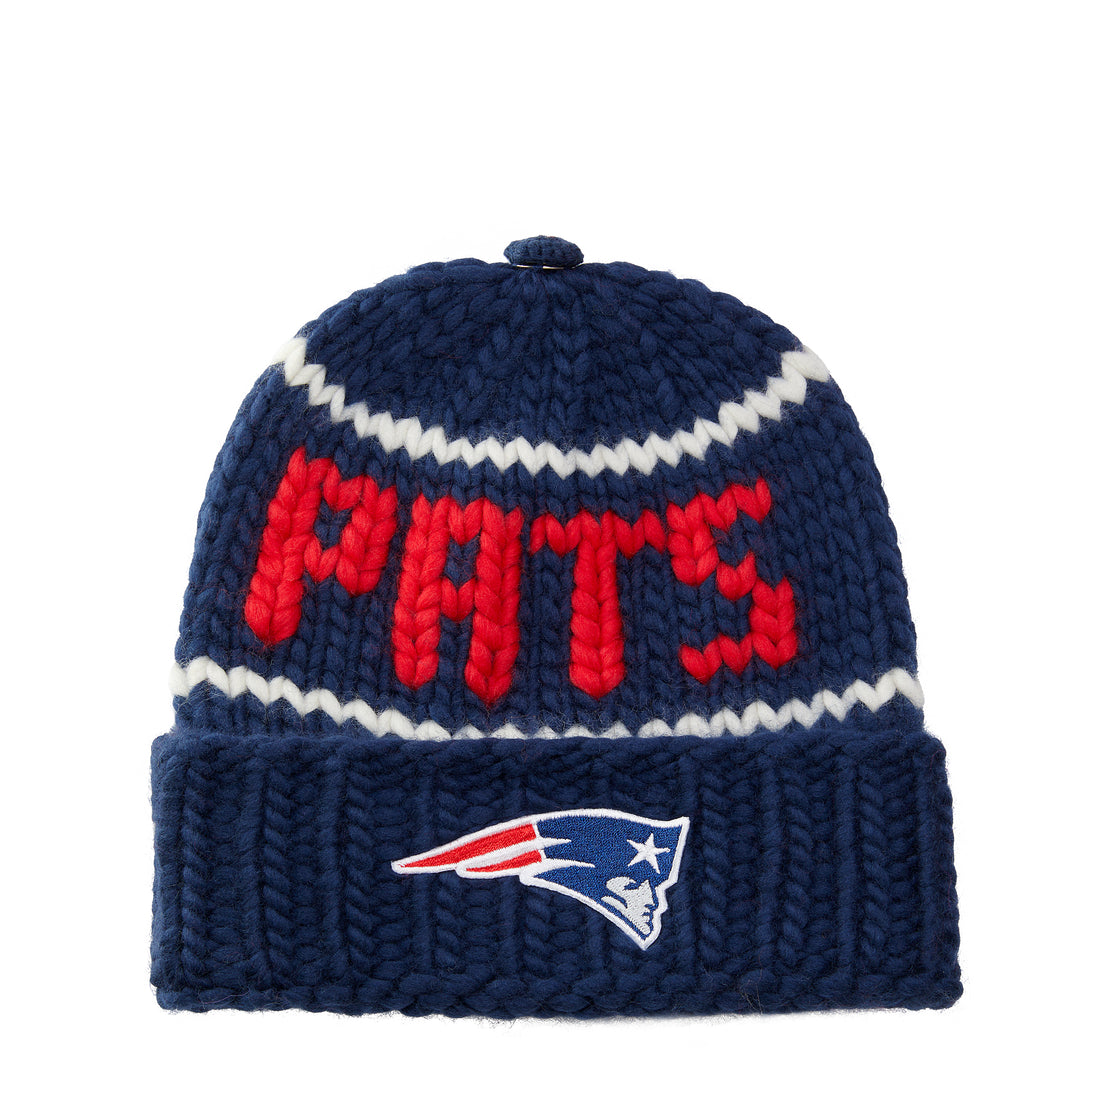 The NFL Collection, Merino Wool Winter Hats